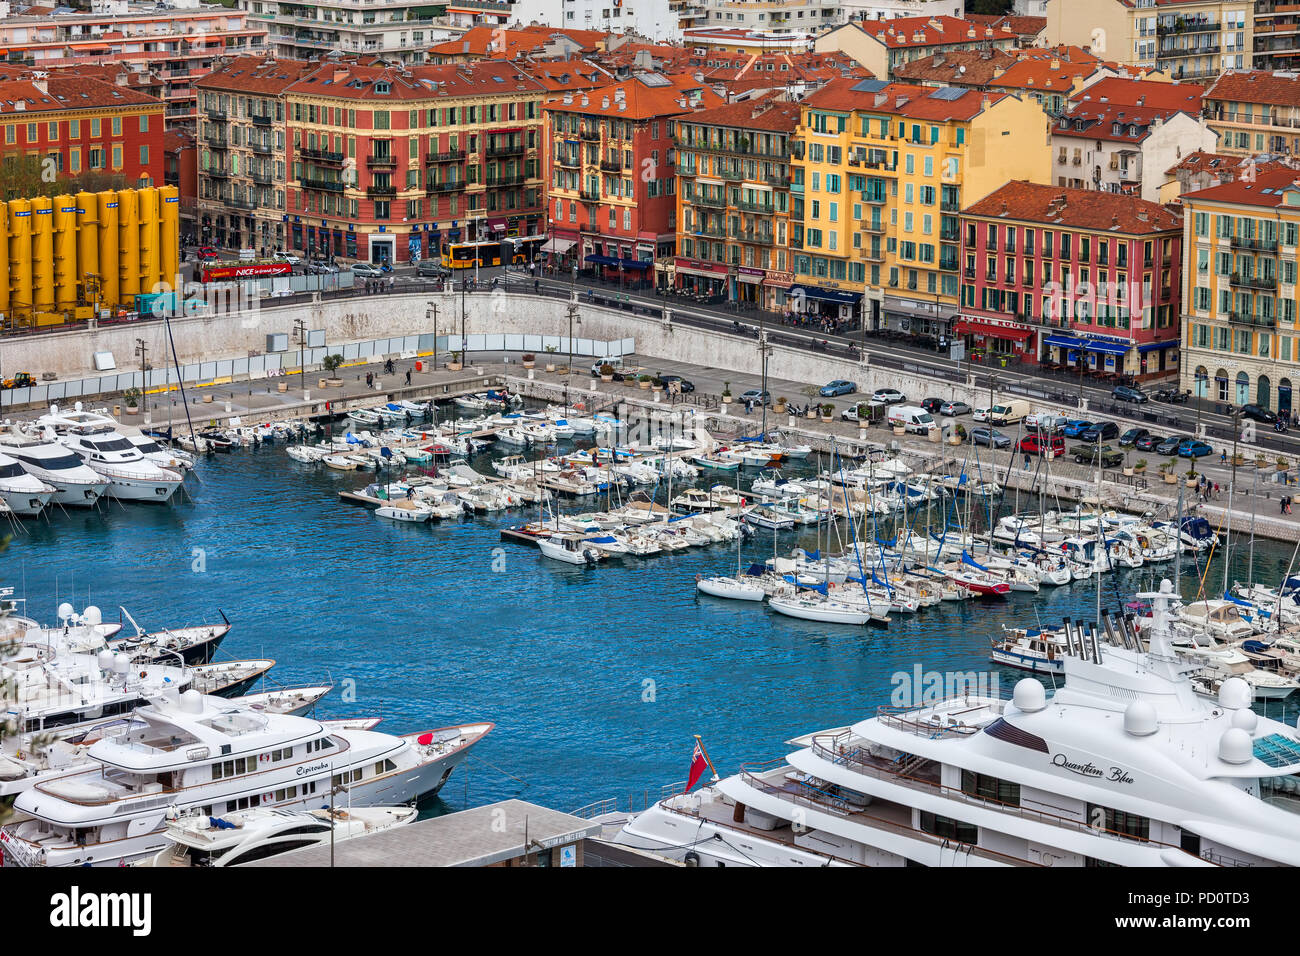 City of Nice in France, colorful buildings, yachts and sailing boats at Port Lympia on French Riviera Stock Photo